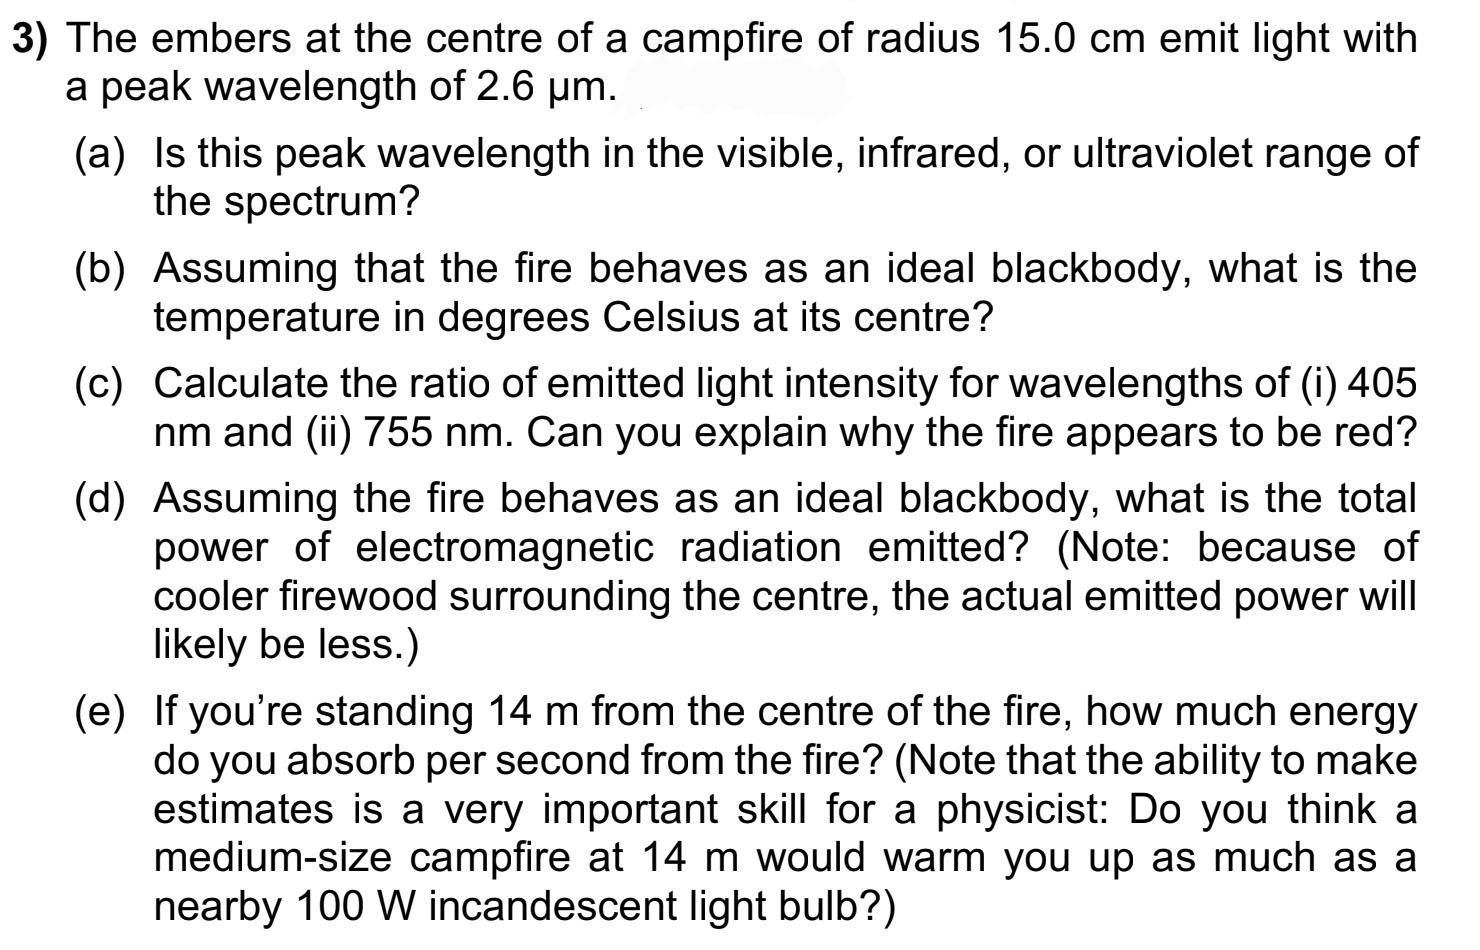 3) The embers at the centre of a campfire of radius 15.0 cm emit light with a peak wavelength of 2.6 m. (a)